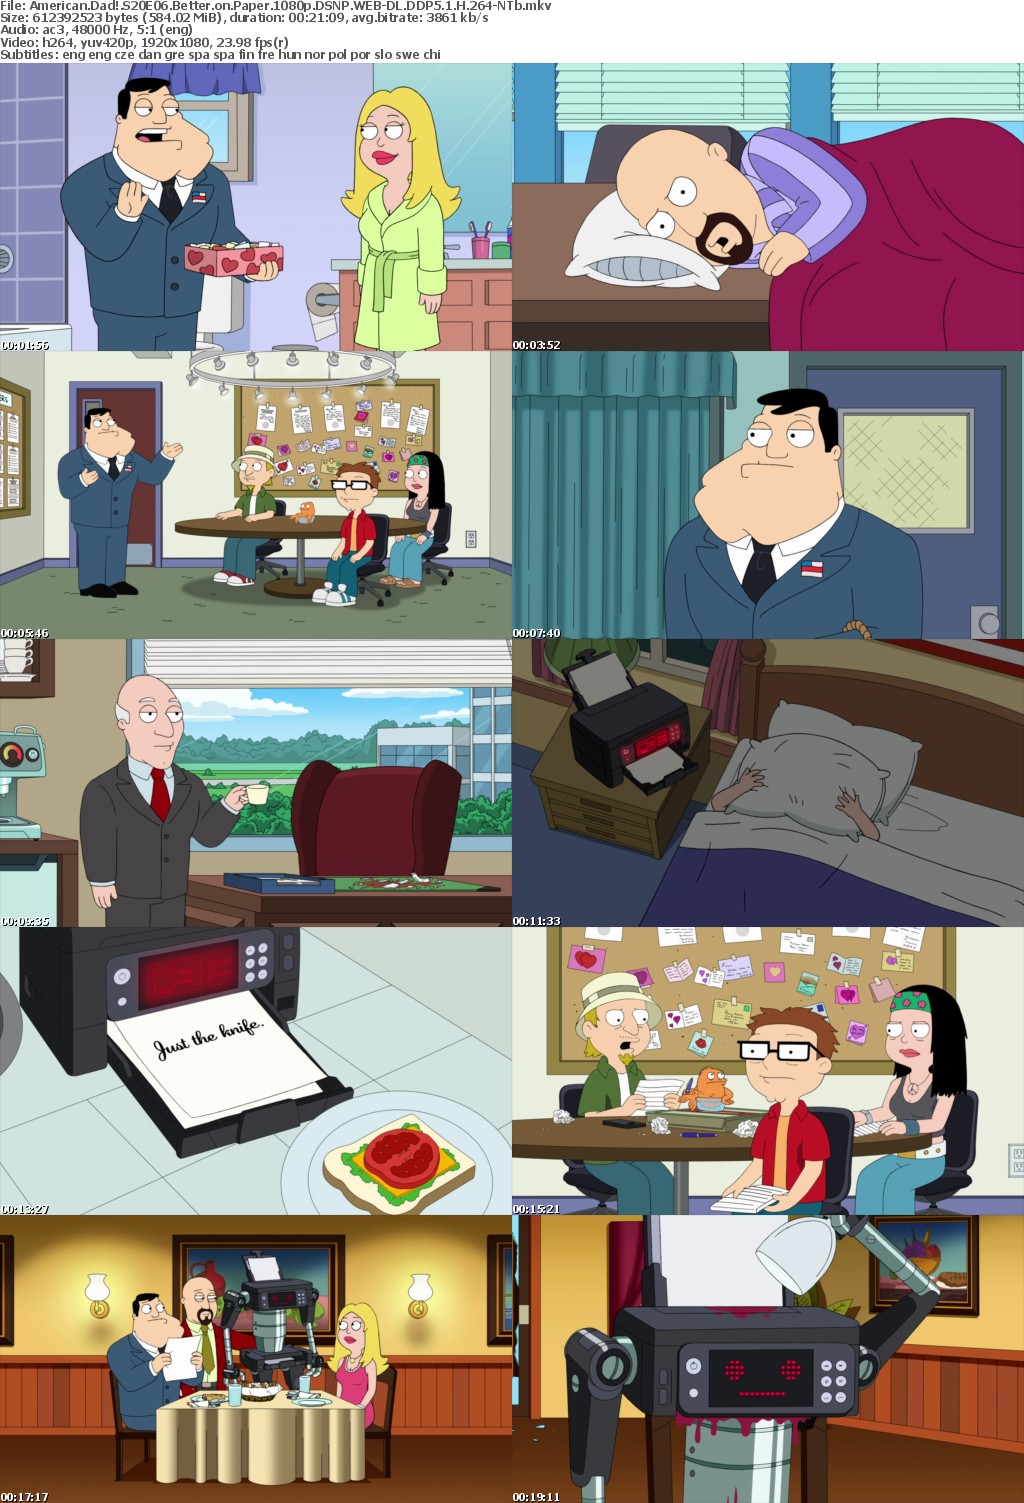 American Dad! S20E06 Better on Paper 1080p DSNP WEB-DL DDP5 1 H 264-NTb